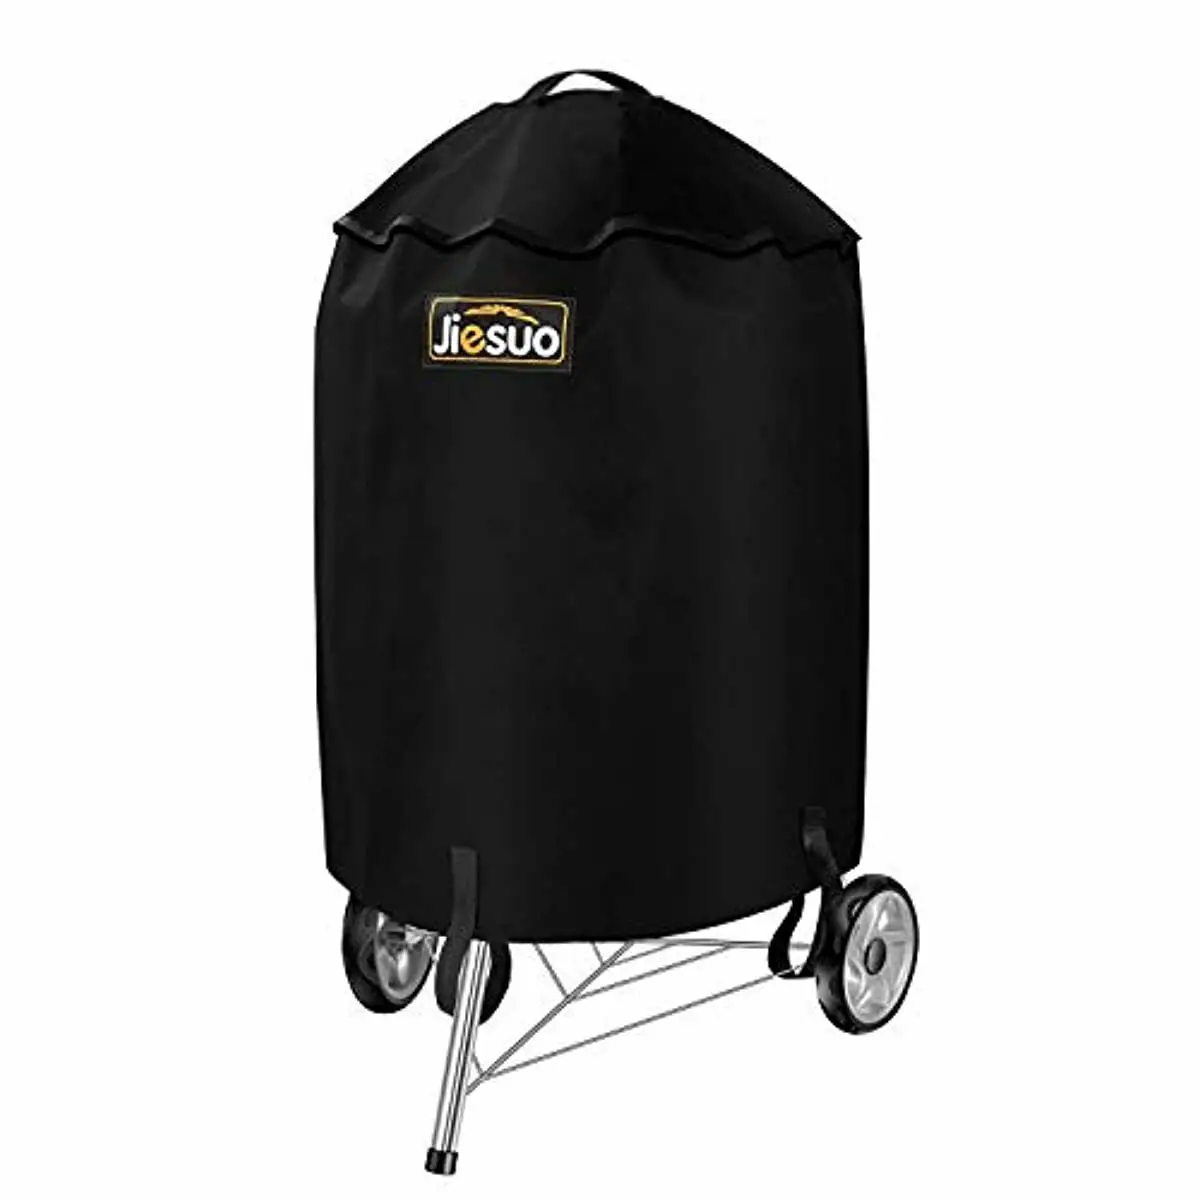 Grill Cover for Weber Charcoal Kettle, Premium 22 Inch BBQ Cover ...